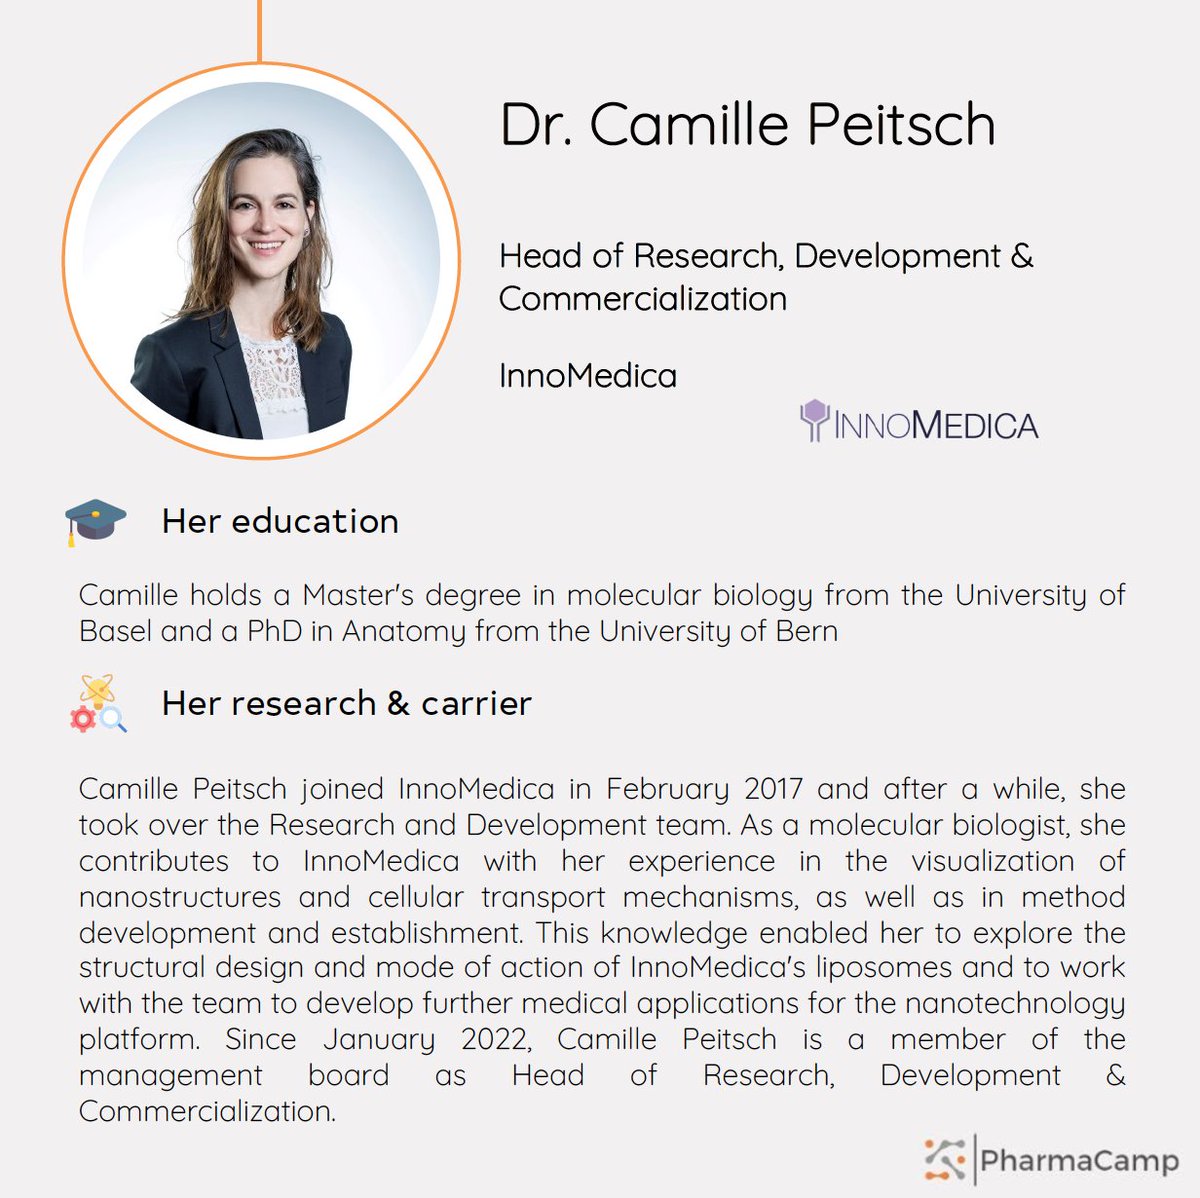 Pharmacamp 2023 will take place in Bern in September. Meet our speakers ! Last on is Dr. Camille Peitsch, Head of Research, Development and Commercialization at InnoMedica ! We are looking forward to listen to her talk ! #pharmacamp #unibe #precisionmedicine #digitalisation